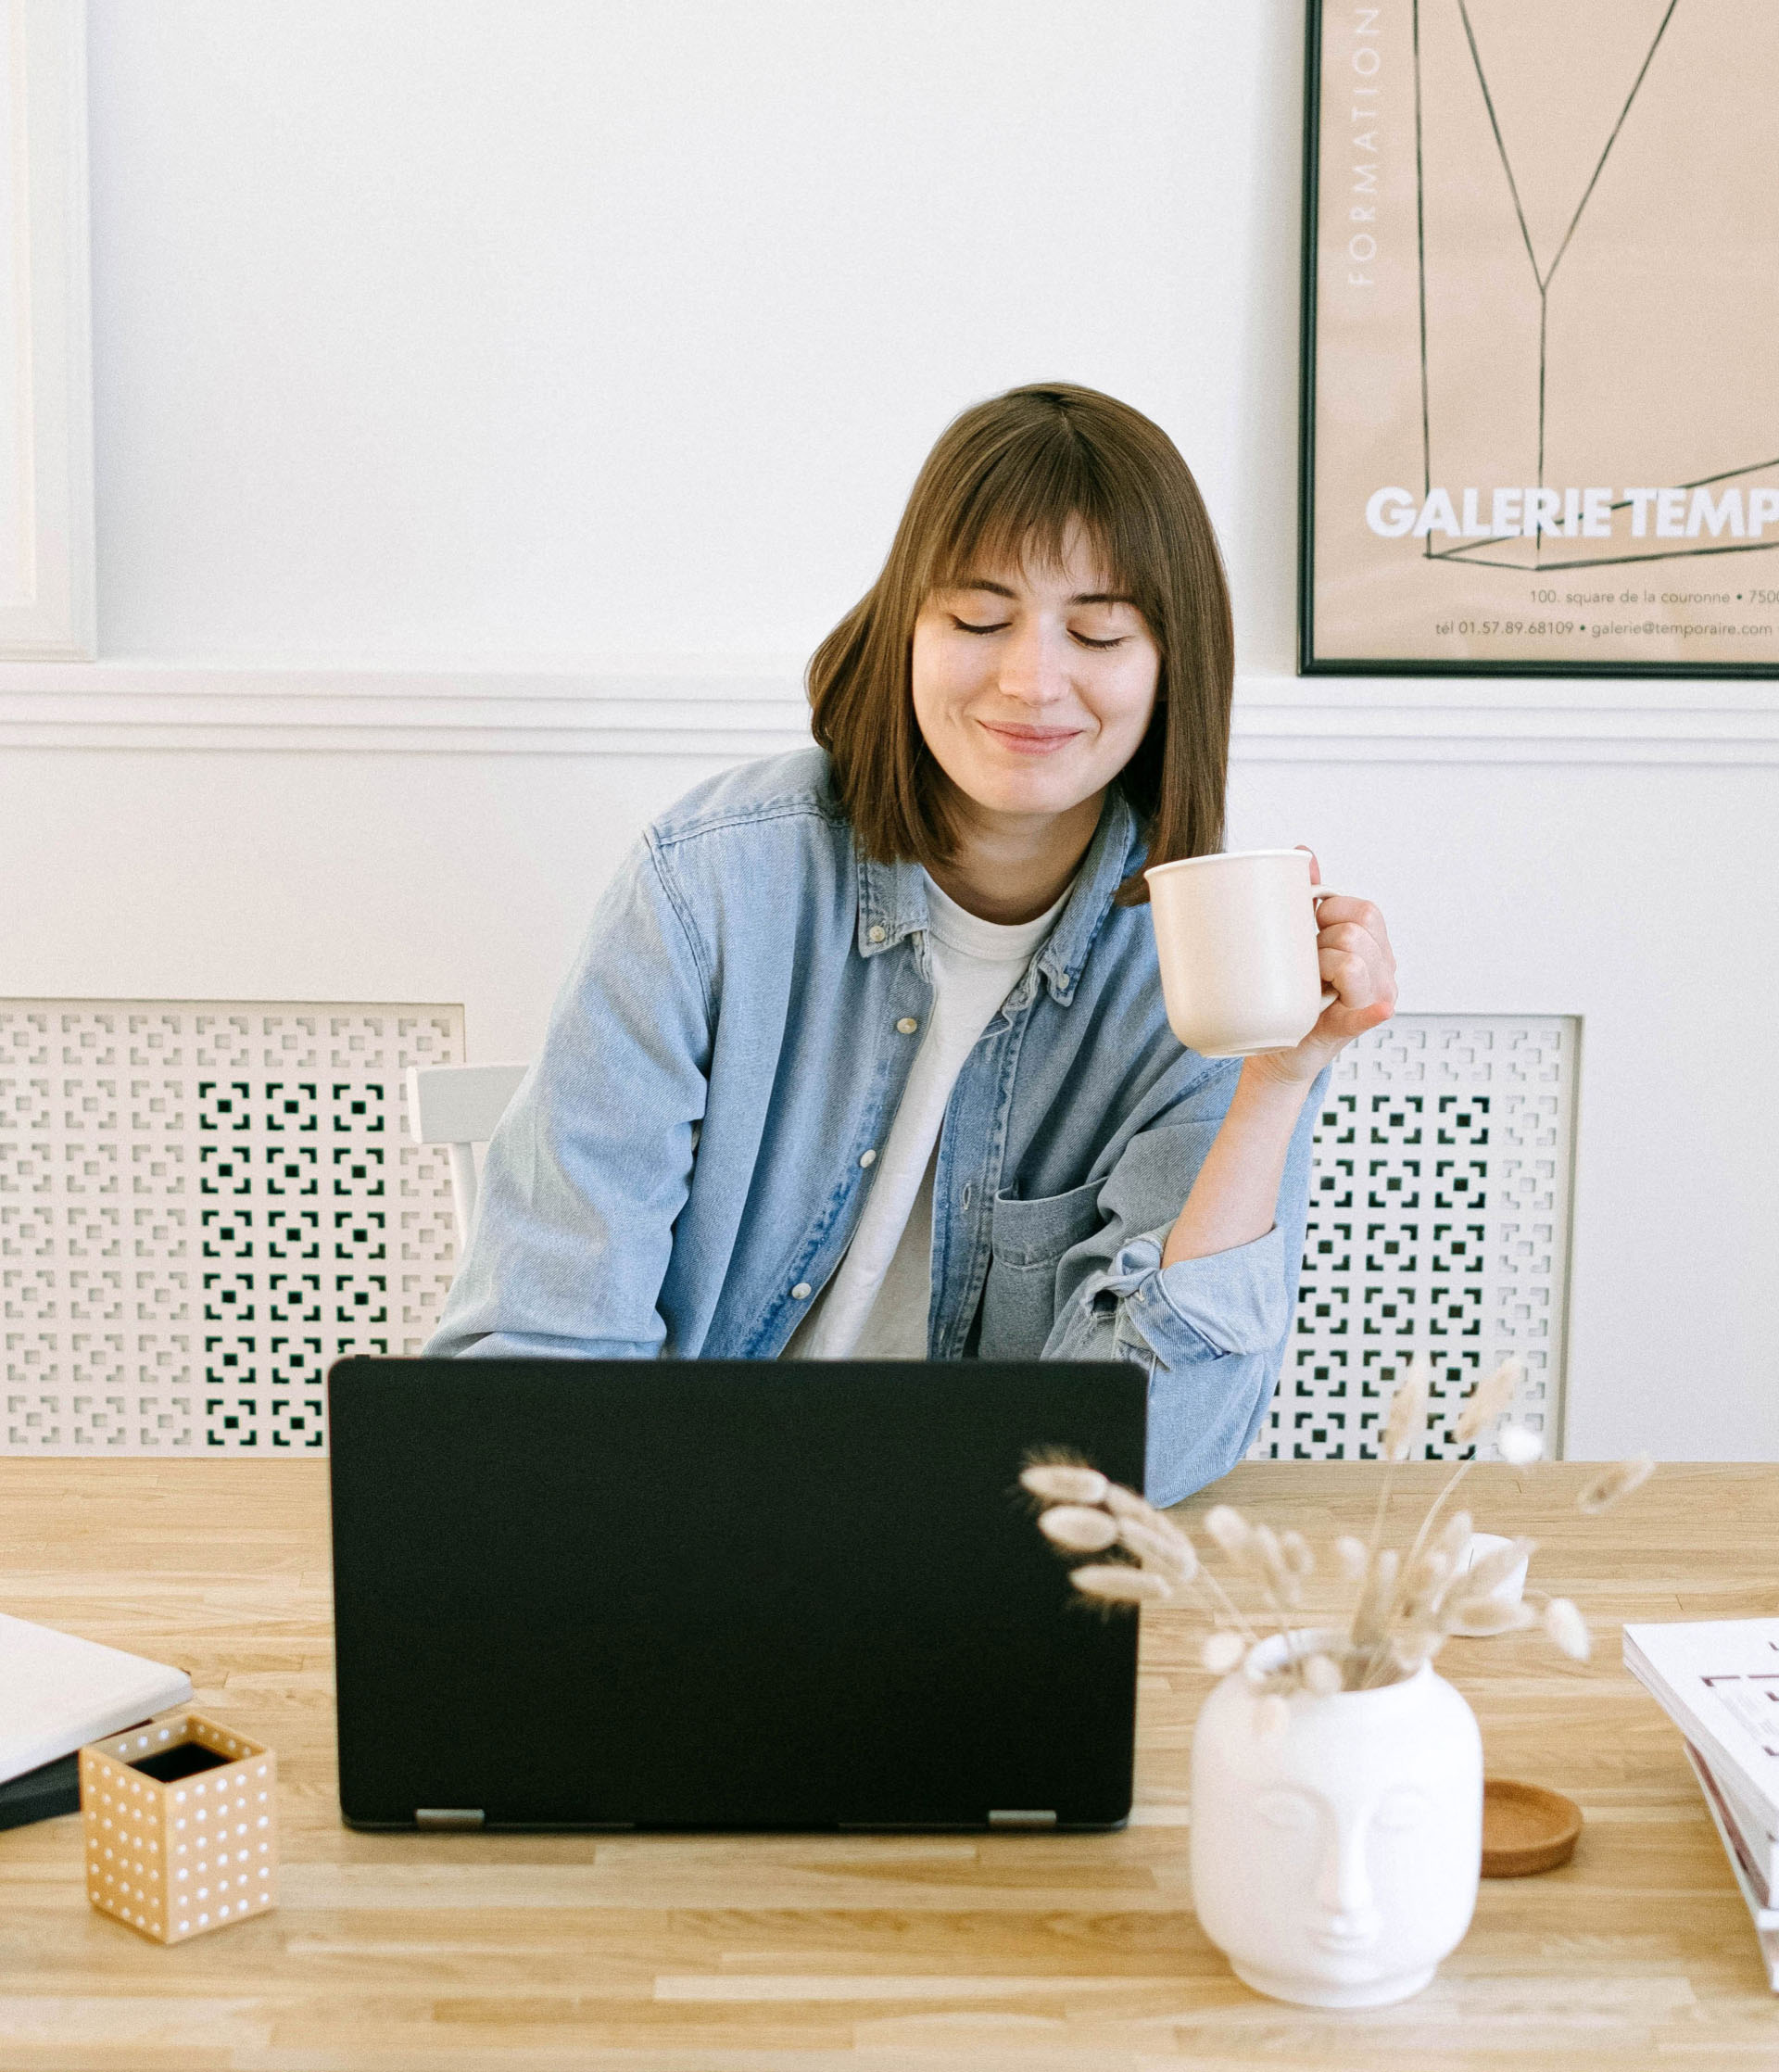 Girl with laptop, get started image